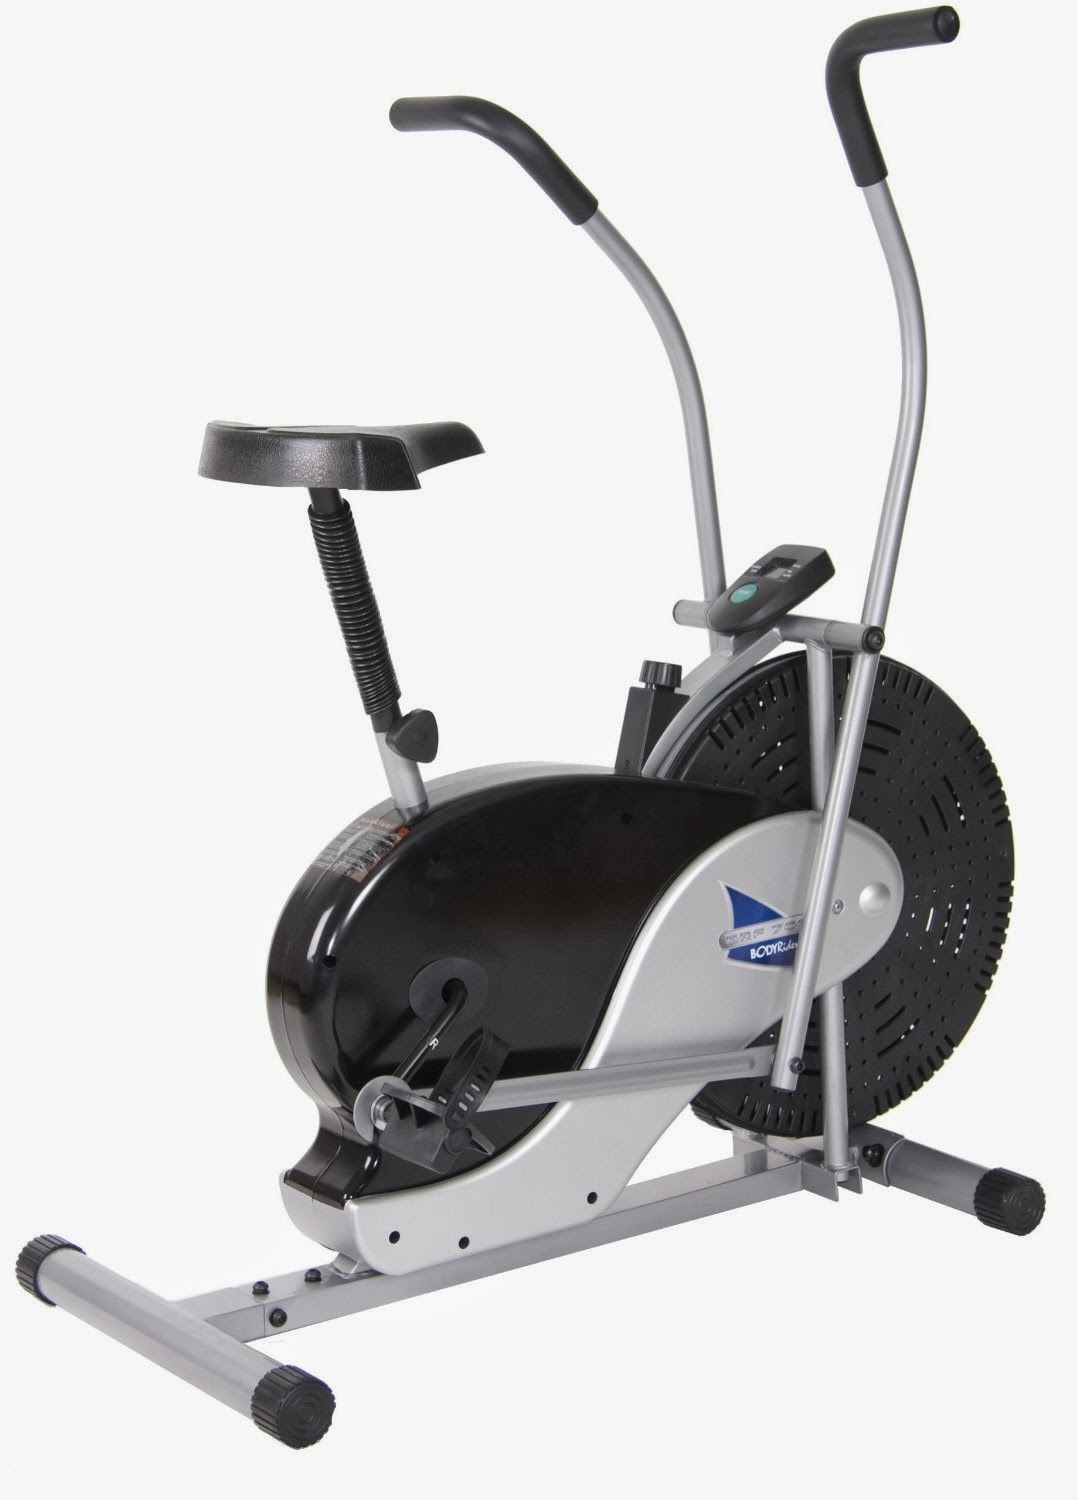 Body Rider BRF700 Fan Exercise Bike, review of features